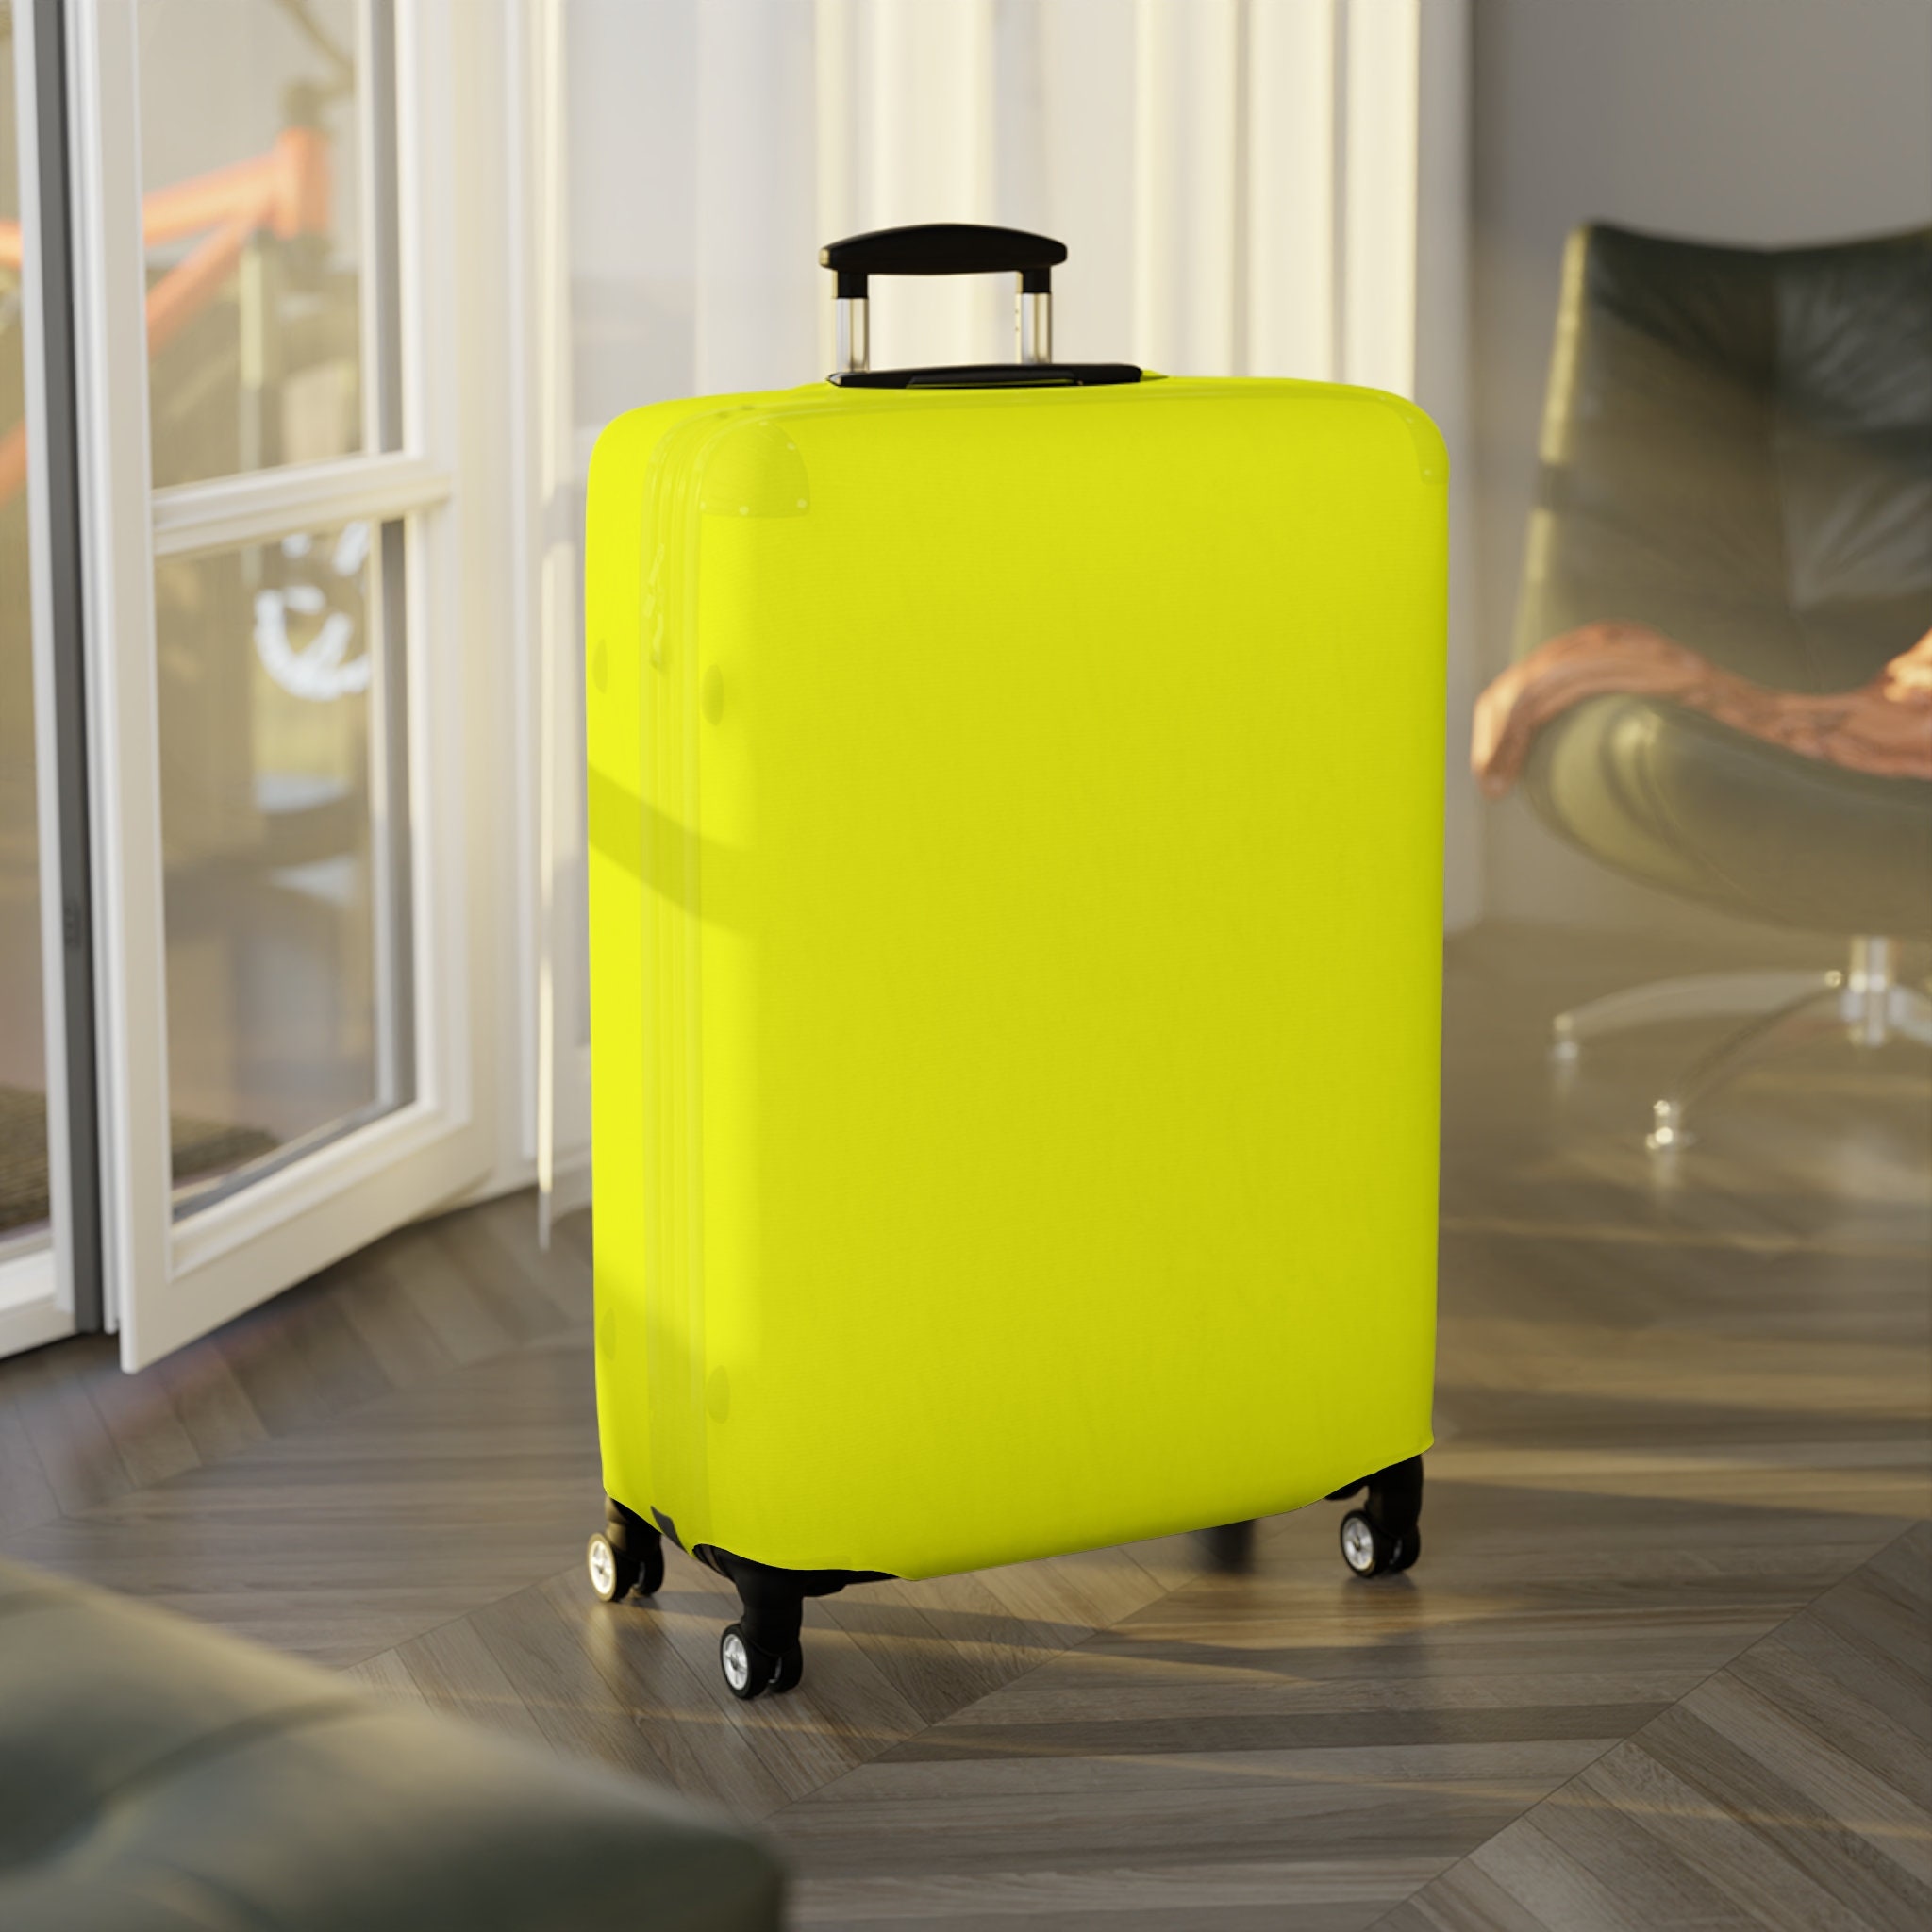 Buy Printed Luggage Cover - XL for USD 27.99